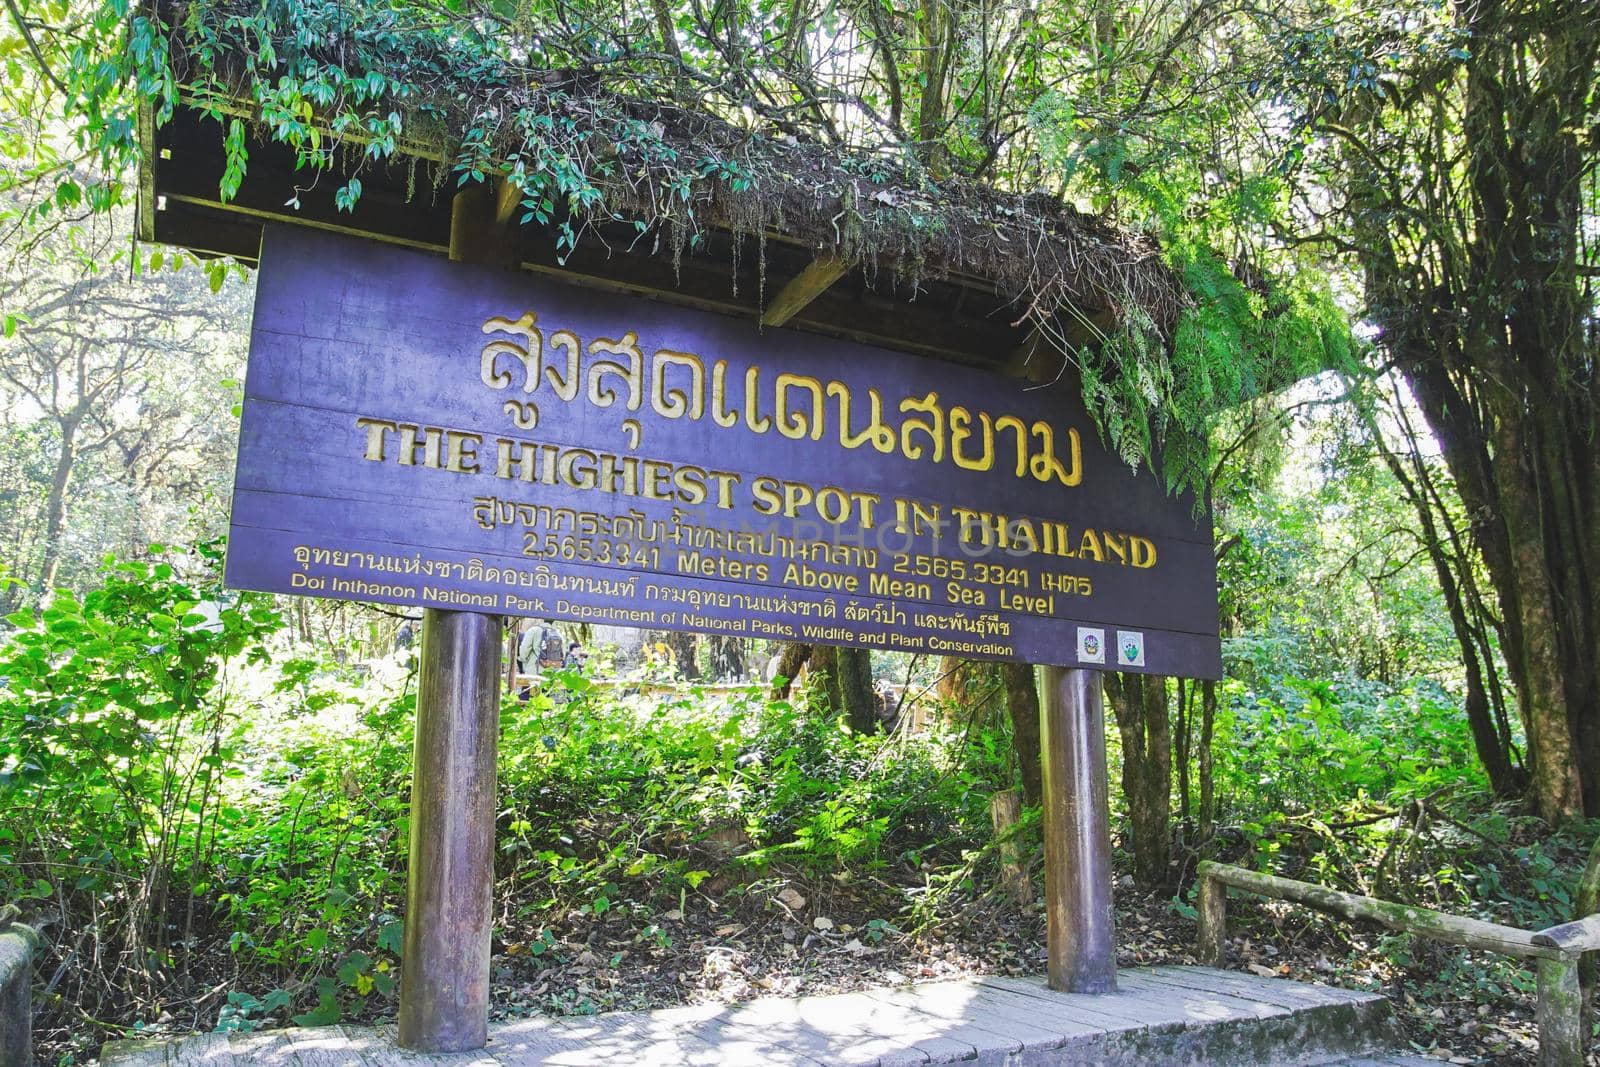 The highest spot in Thailand sign at Doi Inthanon National Park. by Desatit